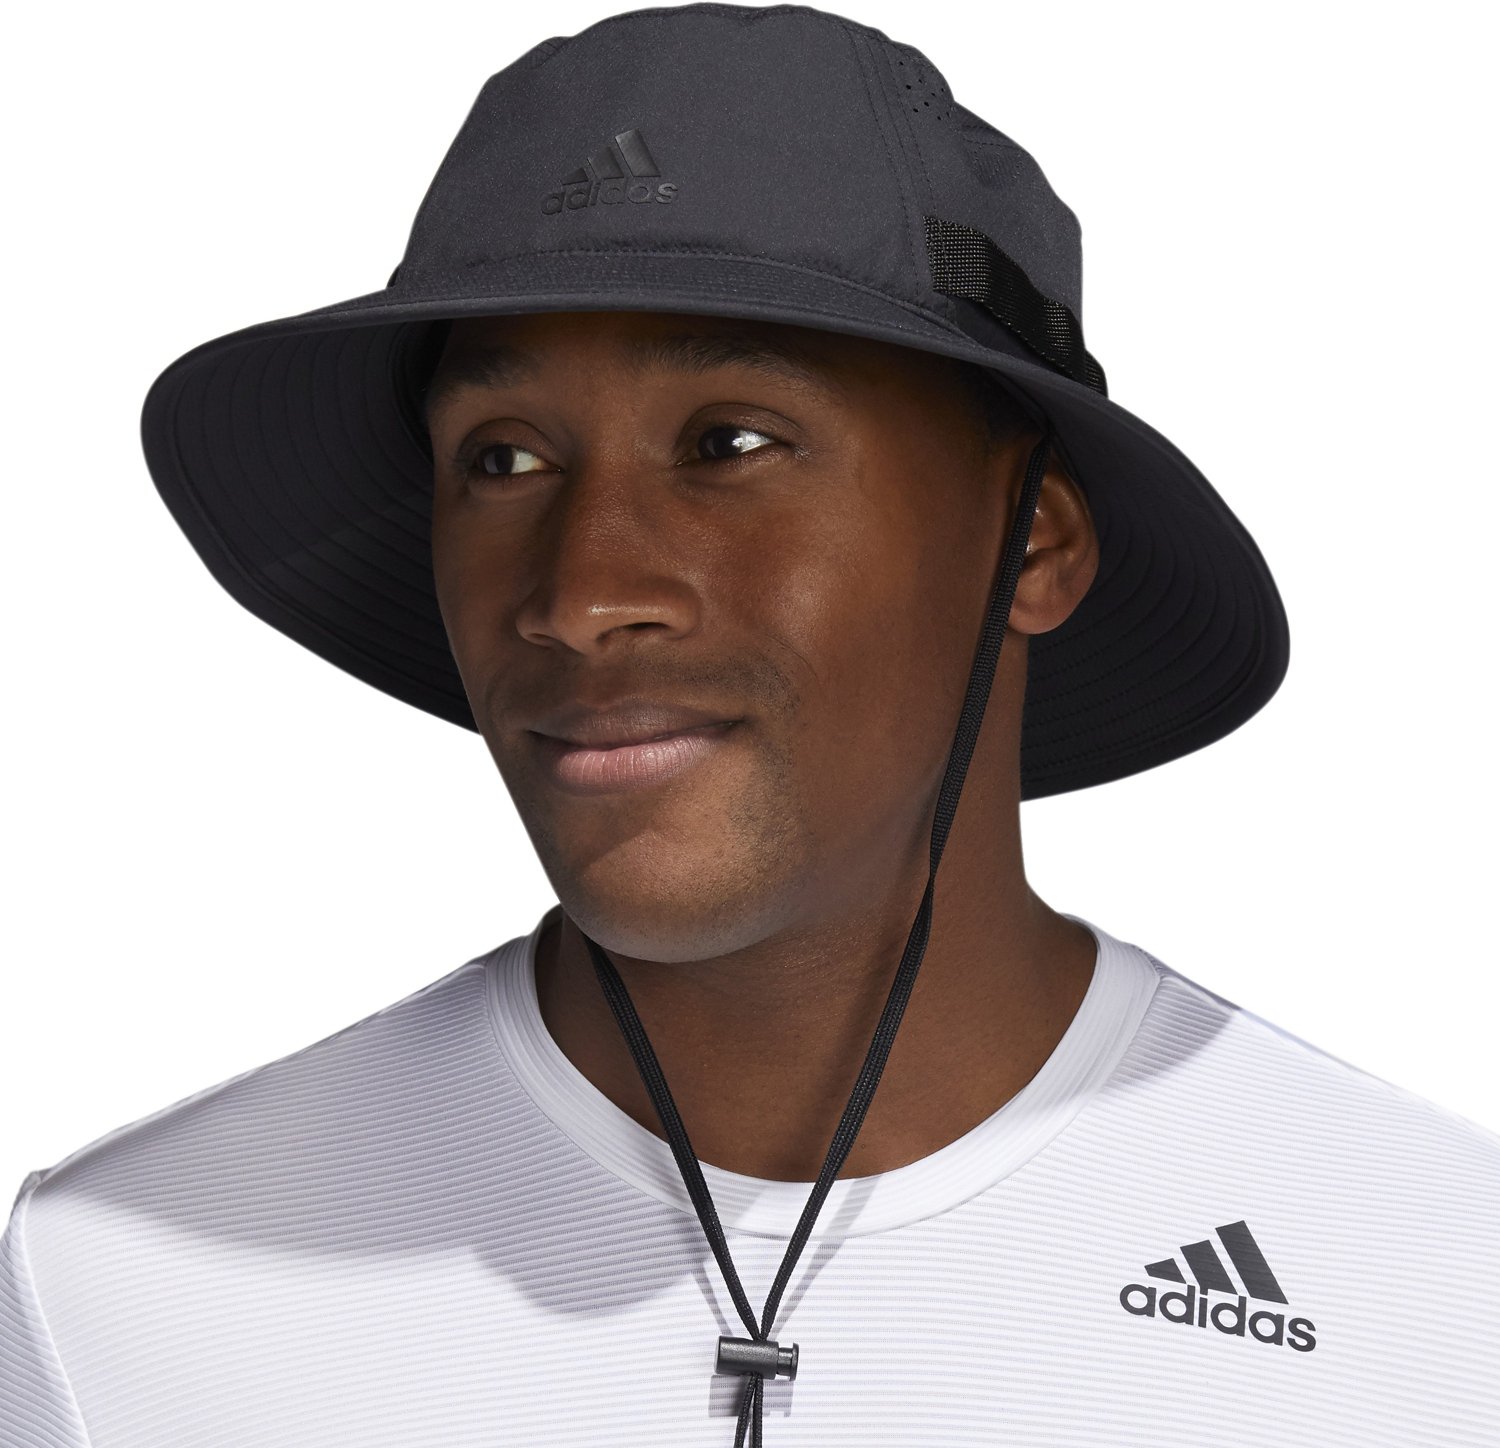 adidas Men's Victory 4 Bucket Hat | Free Shipping at Academy